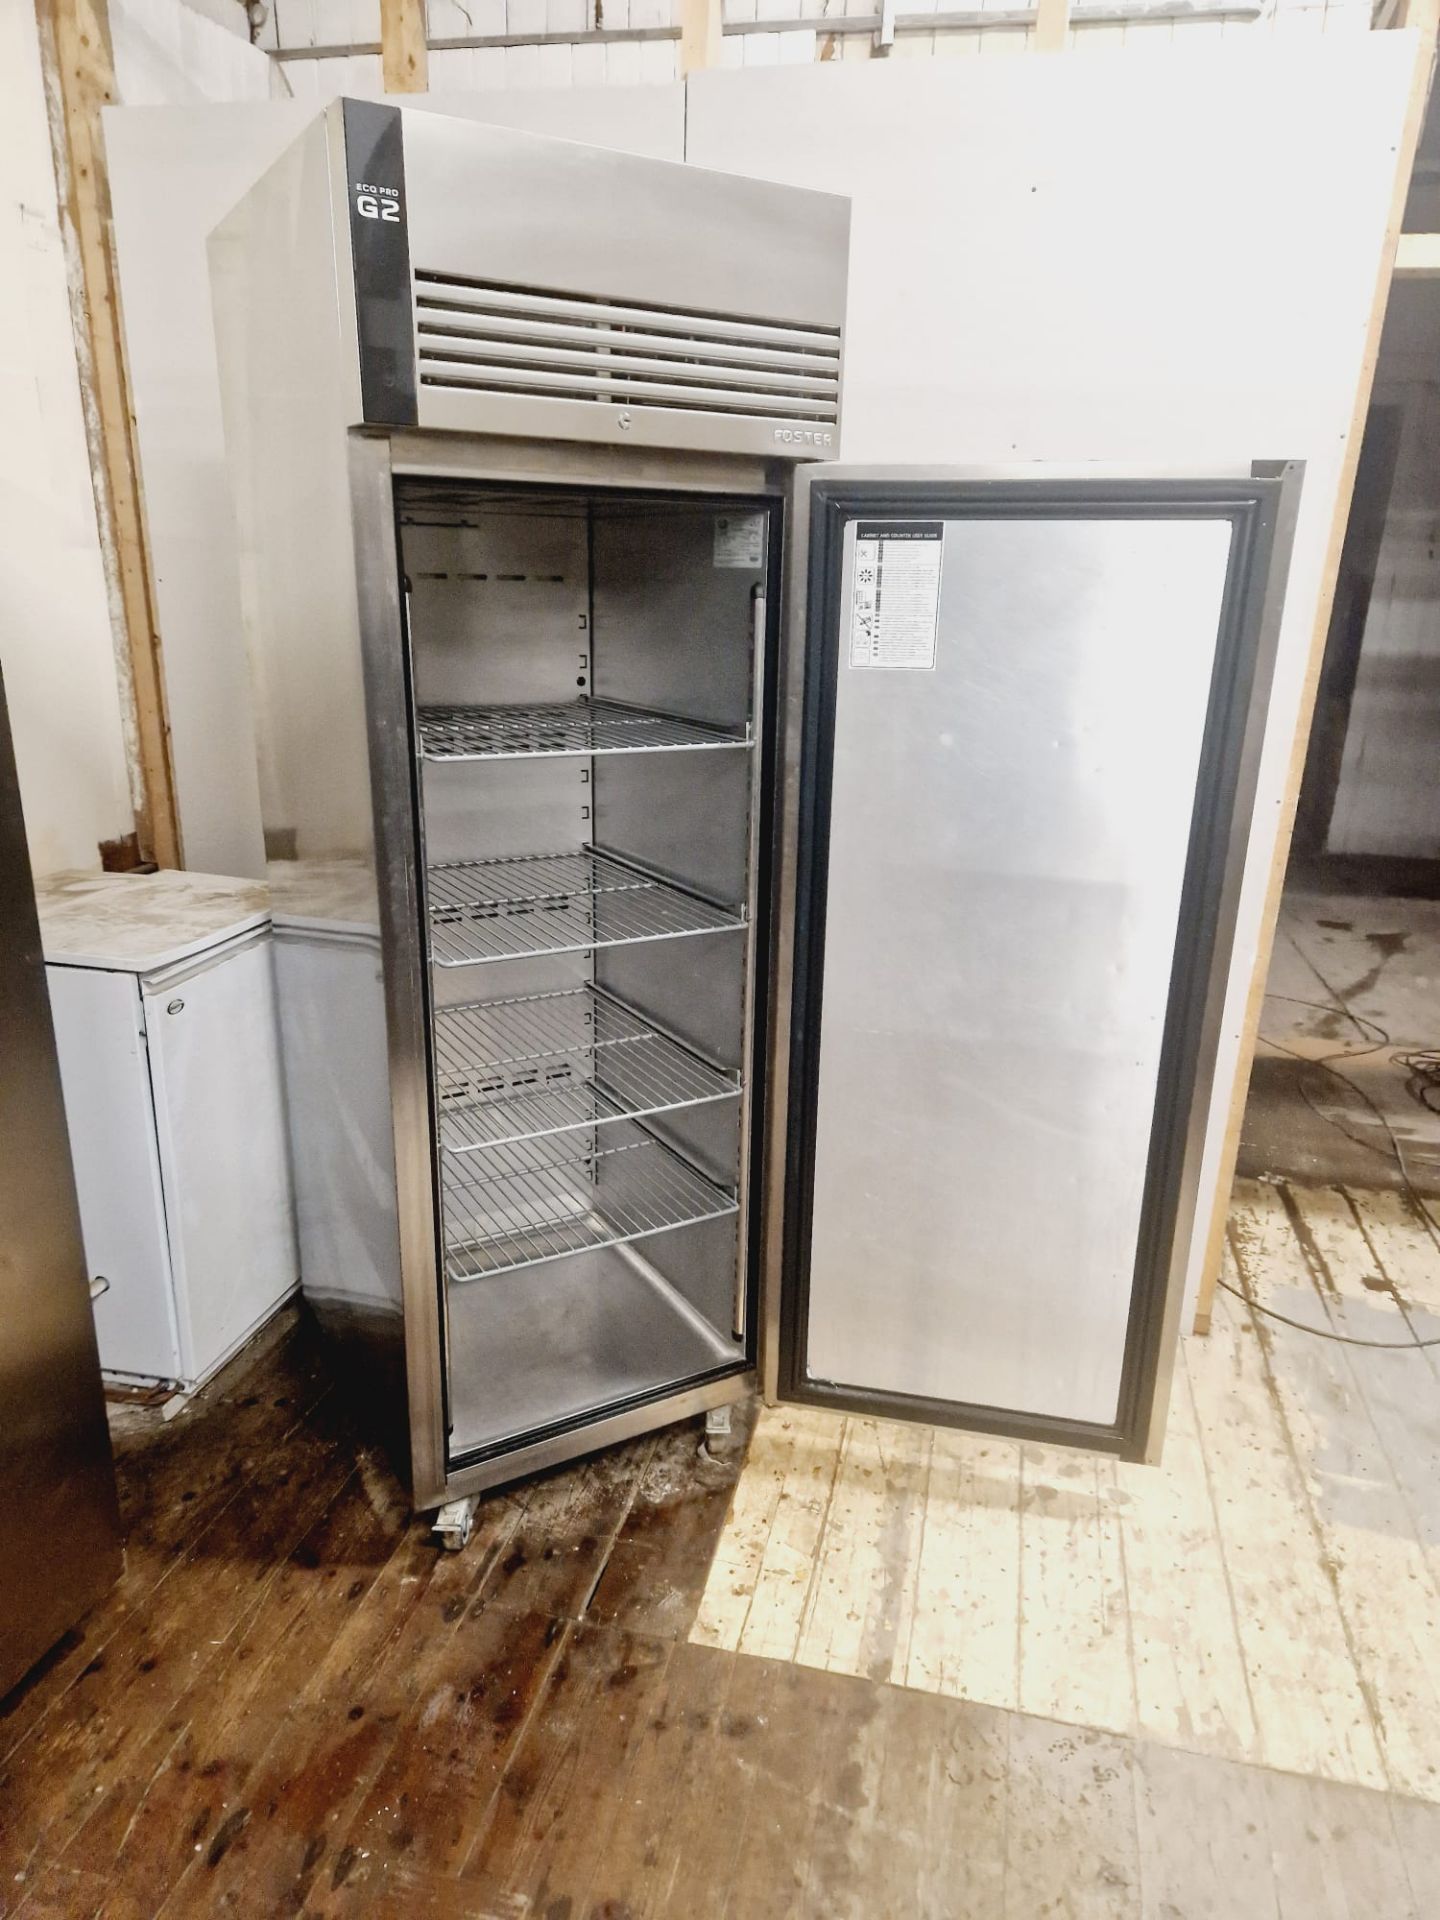 FOSTER G2 UPRIGHT FRIDGE FULLY SERVICED AND WORKING - Bild 3 aus 3